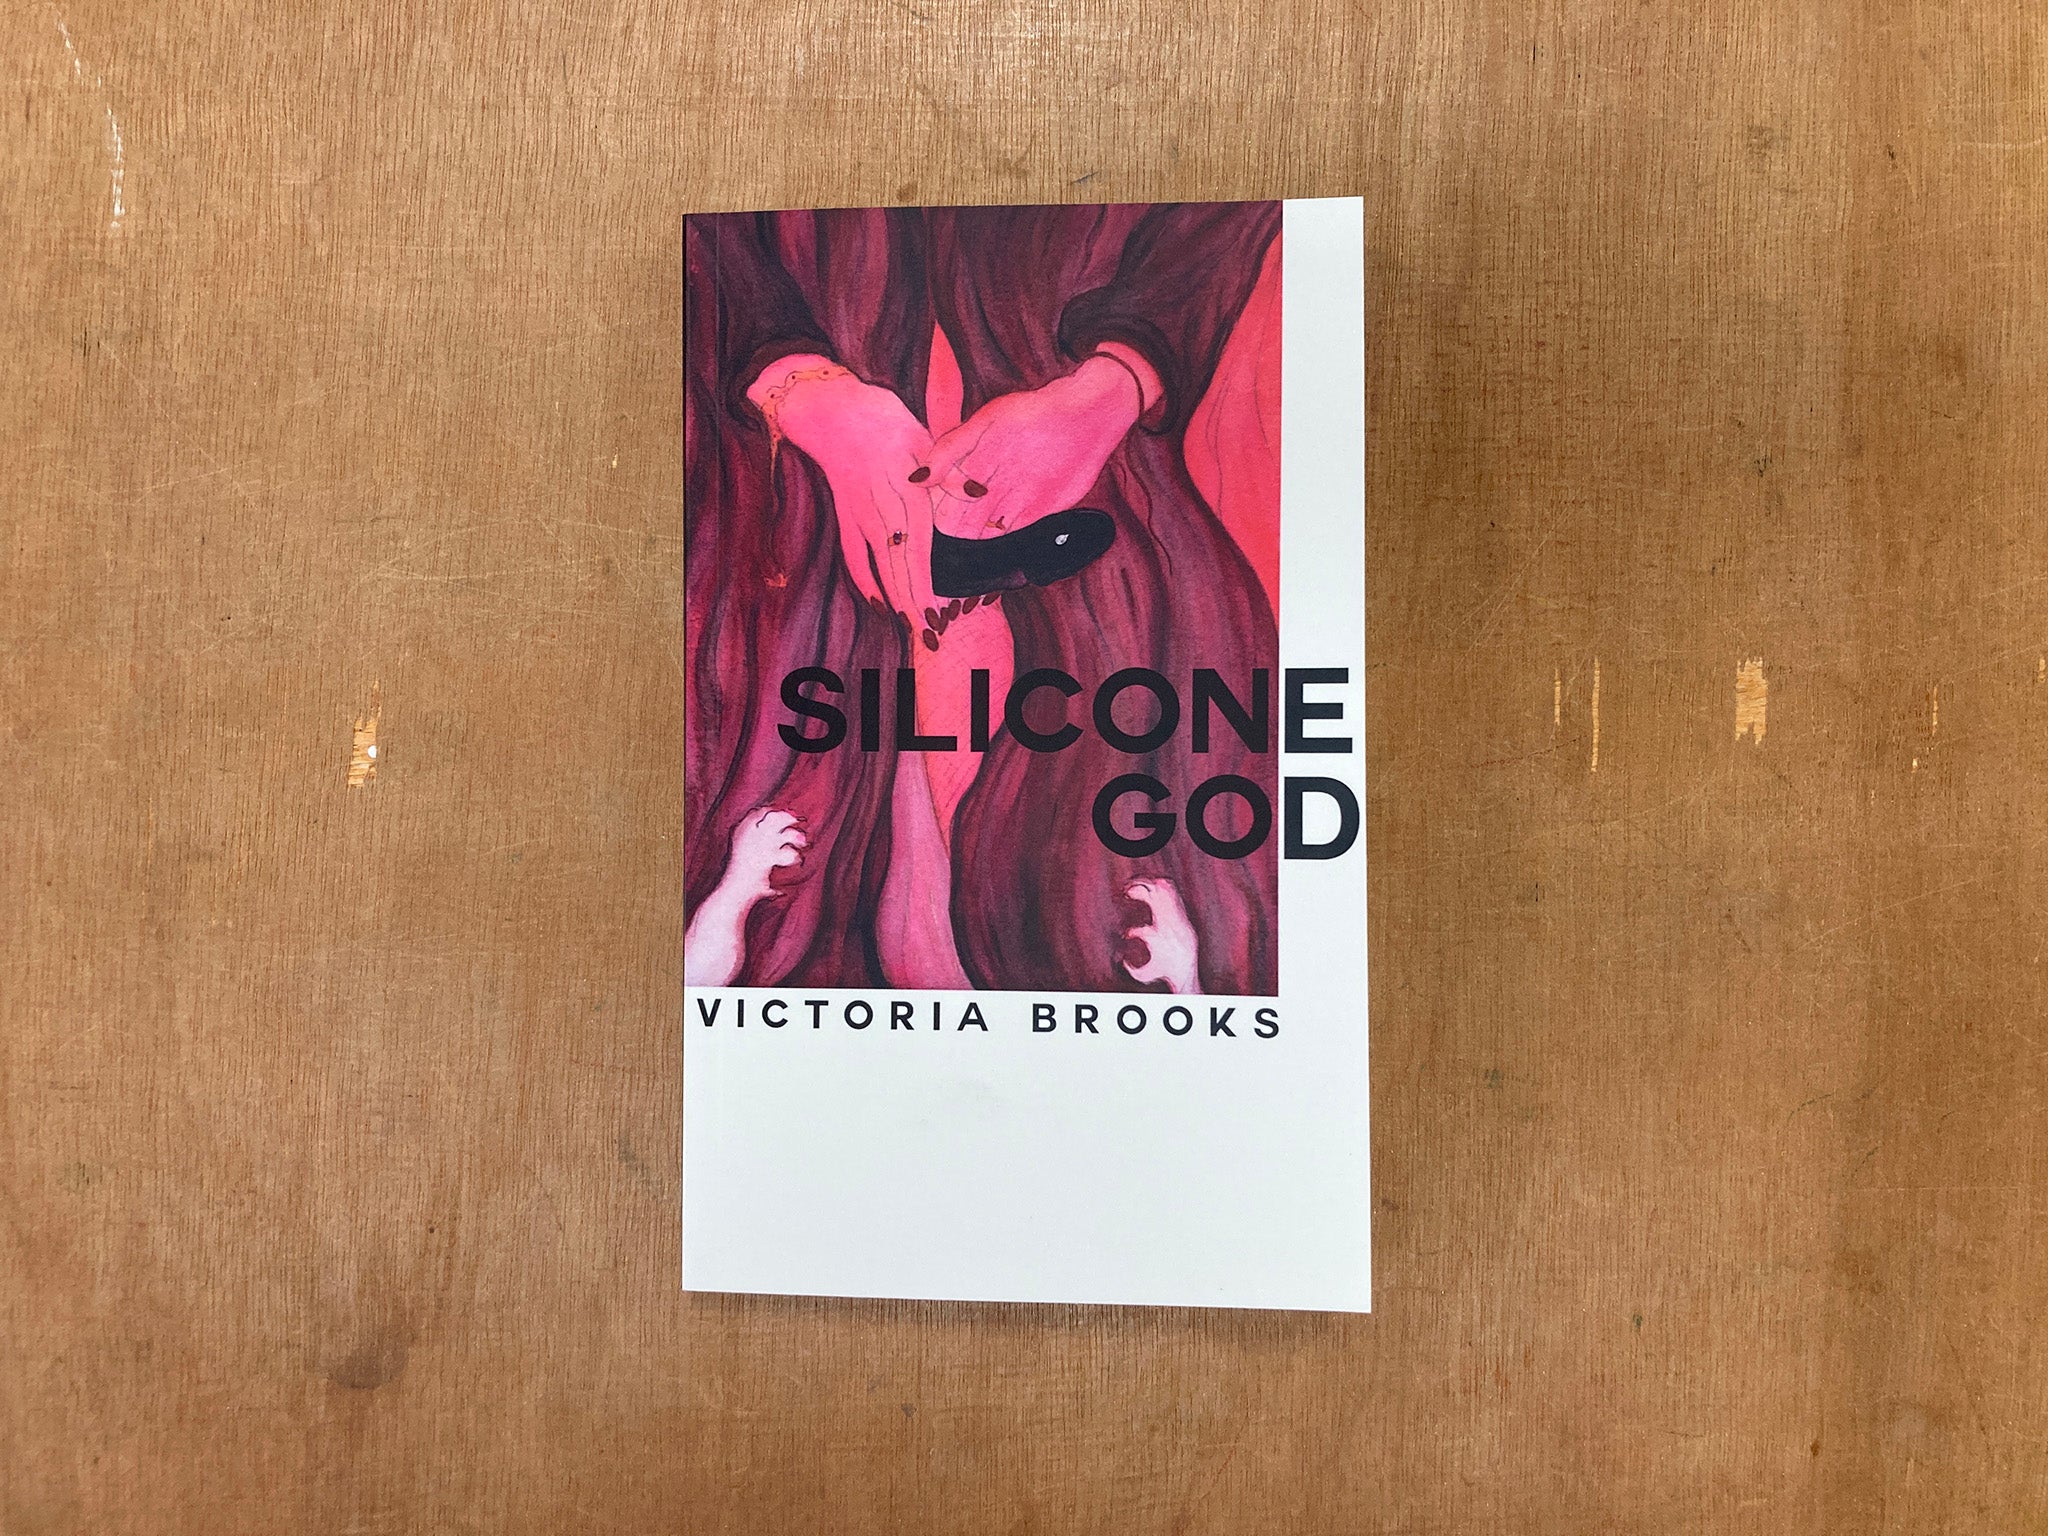 SILICONE GOD by Victoria Brooks